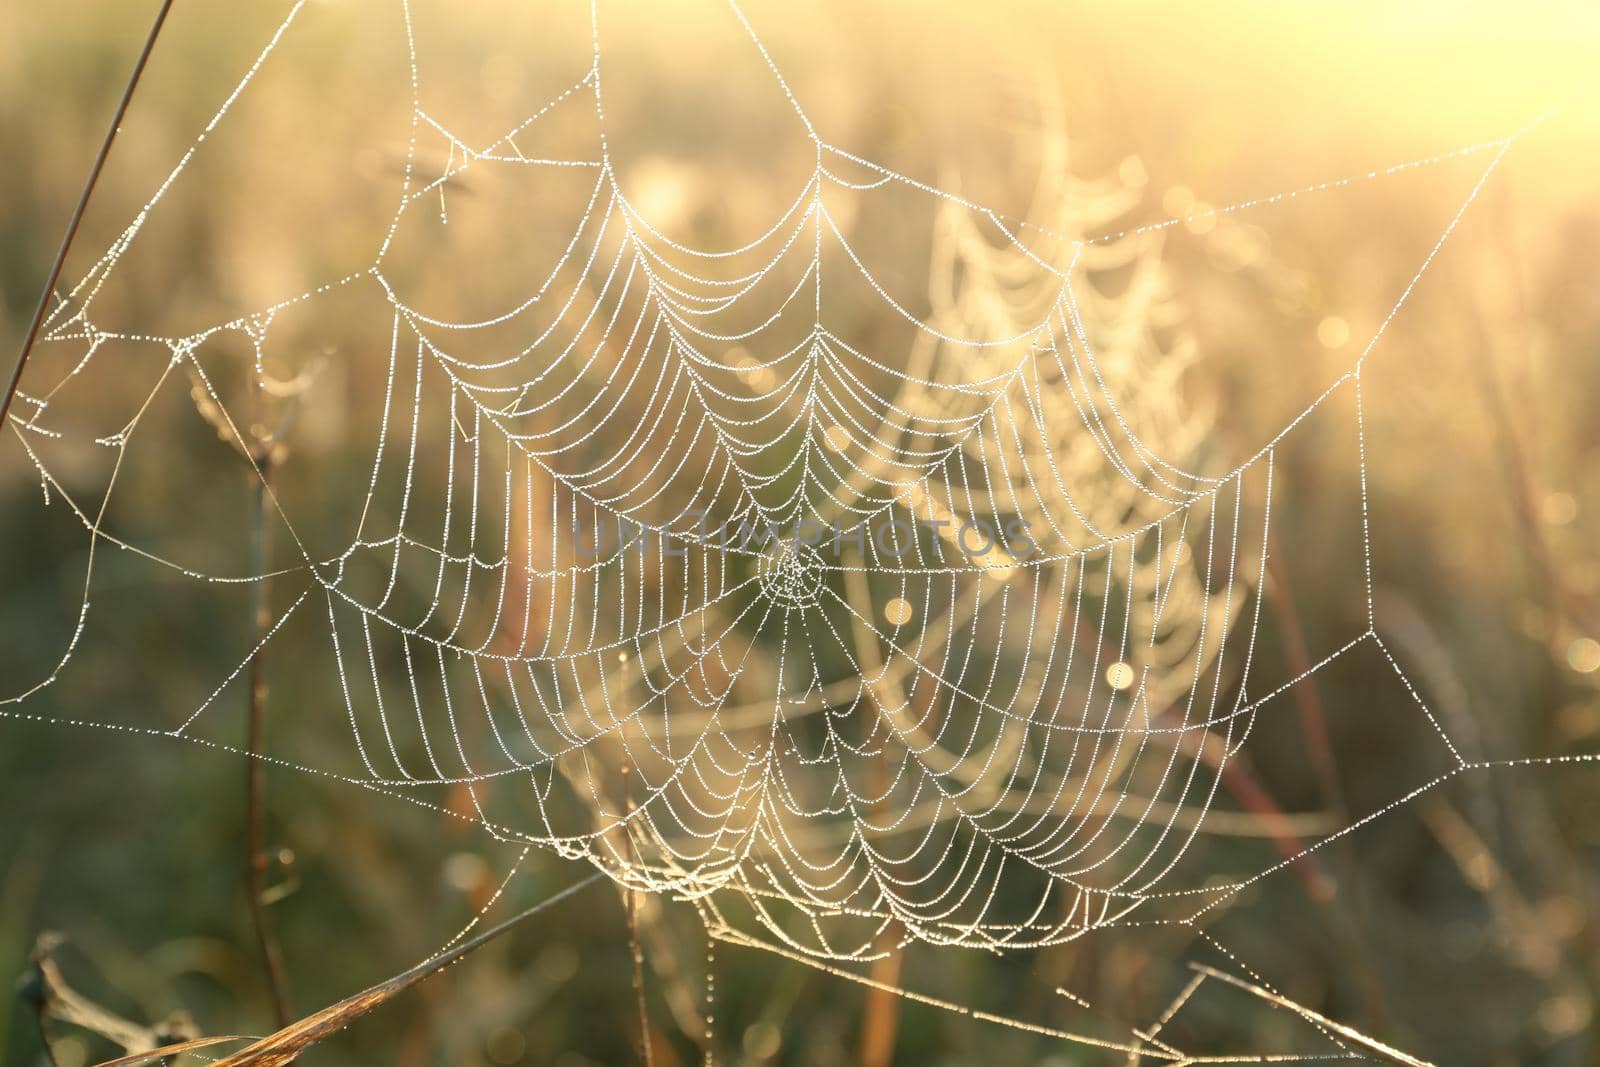 Spider web by nature78